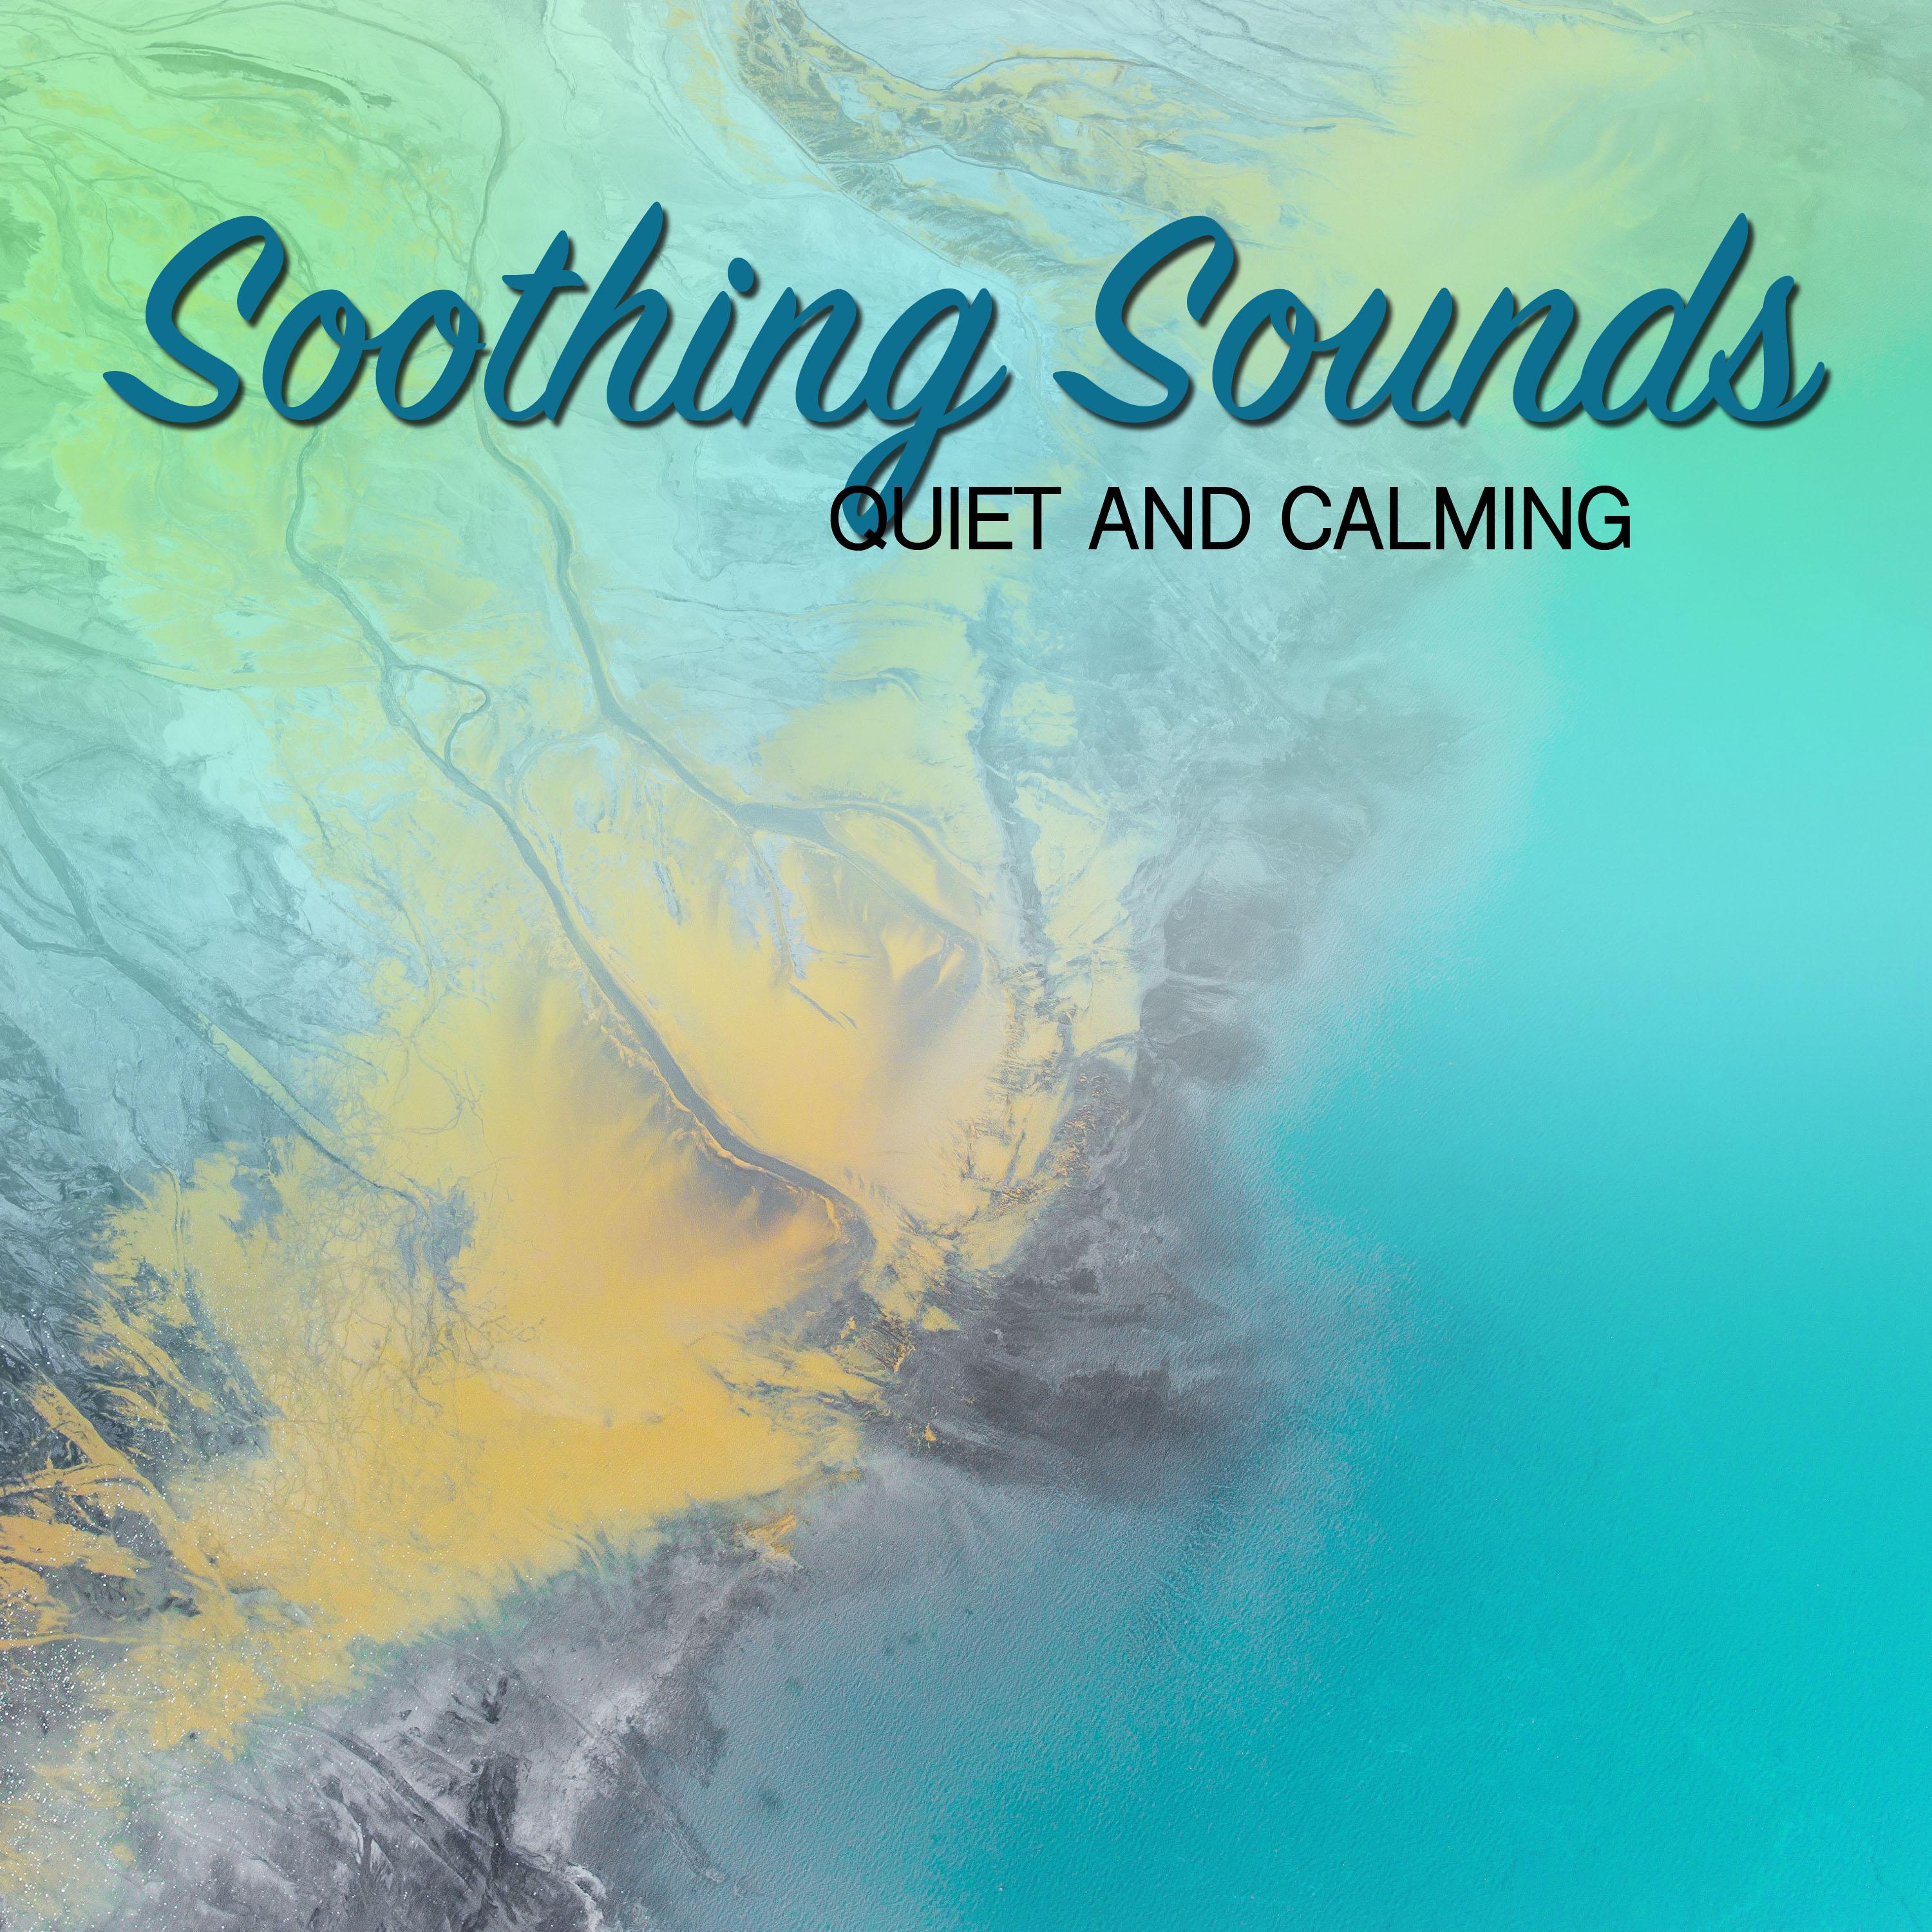 10 Loopable Soothing Sounds, Quiet and Calming